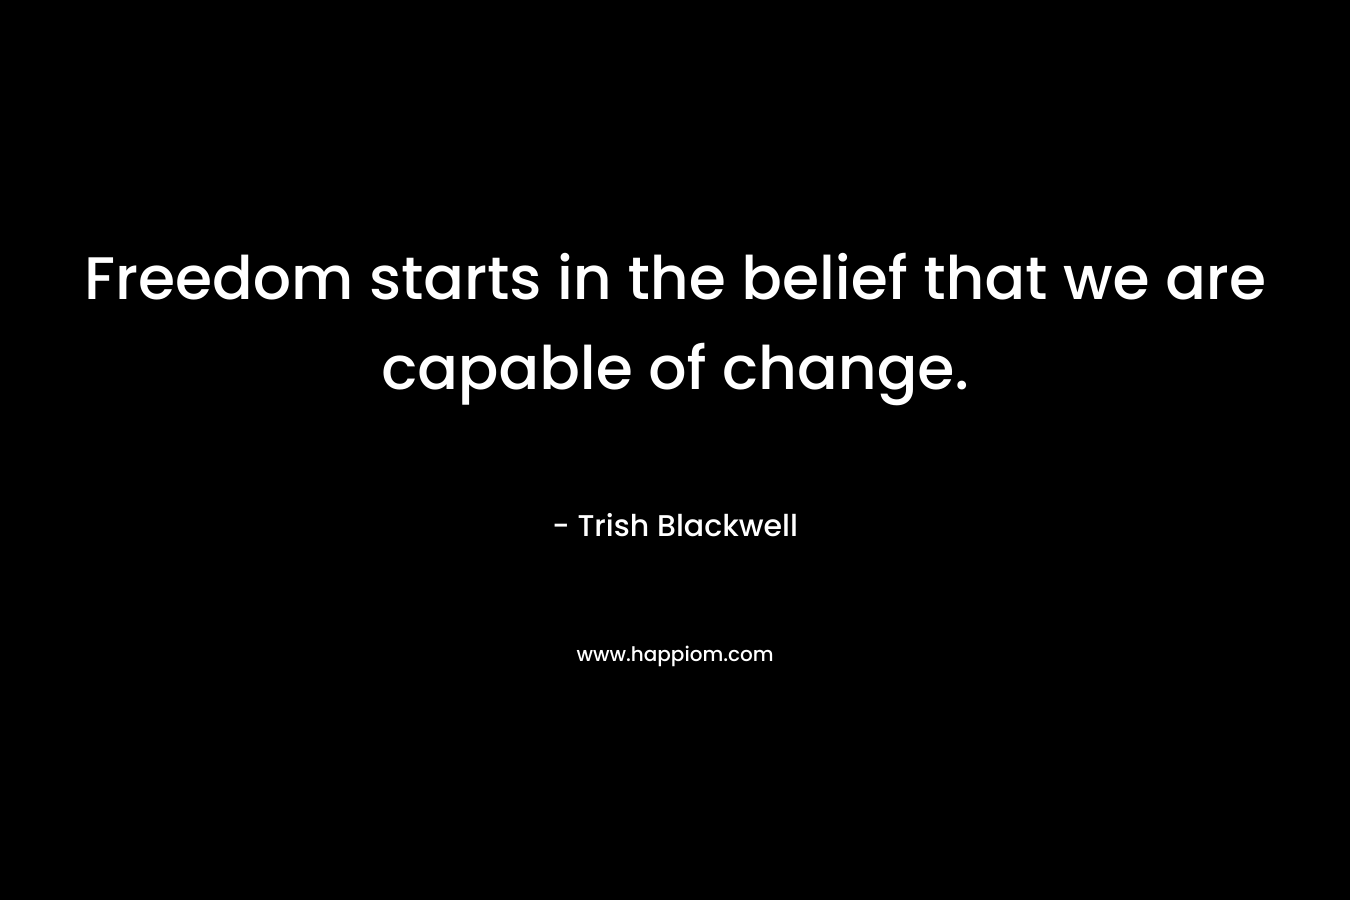 Freedom starts in the belief that we are capable of change.